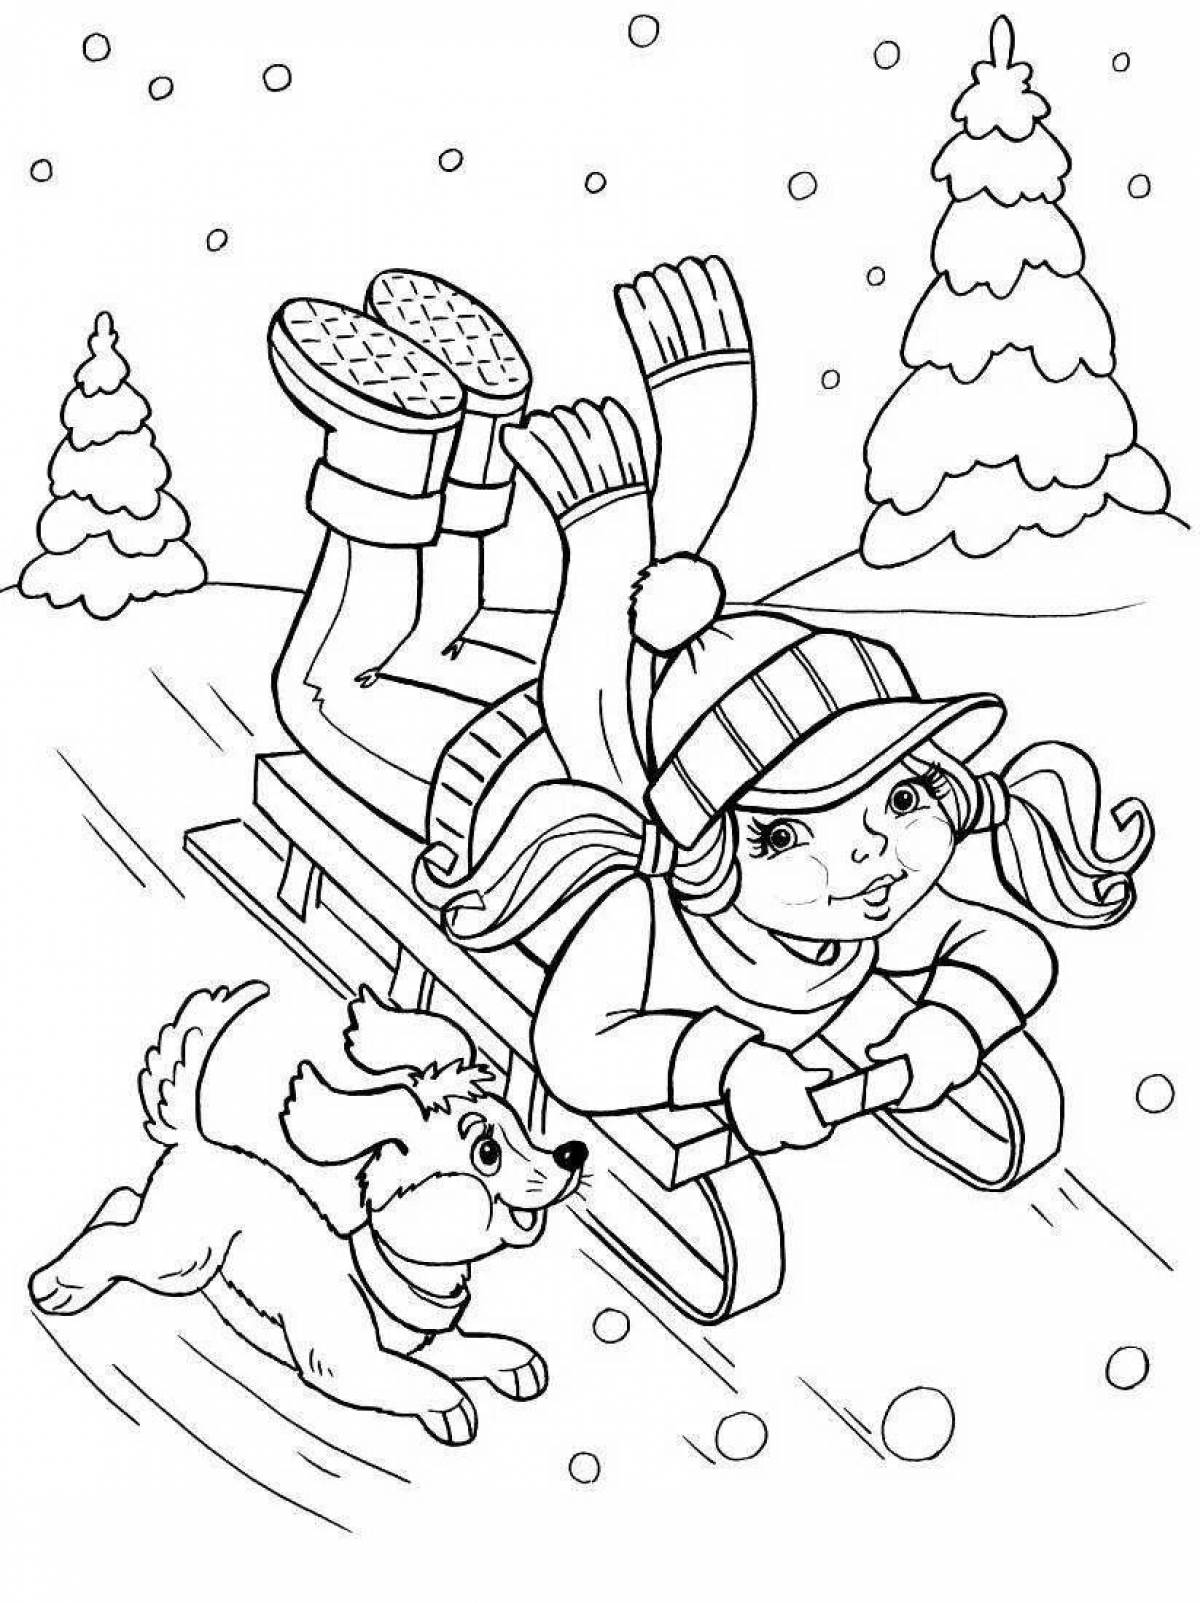 Elegant winter coloring book for children 6-7 years old